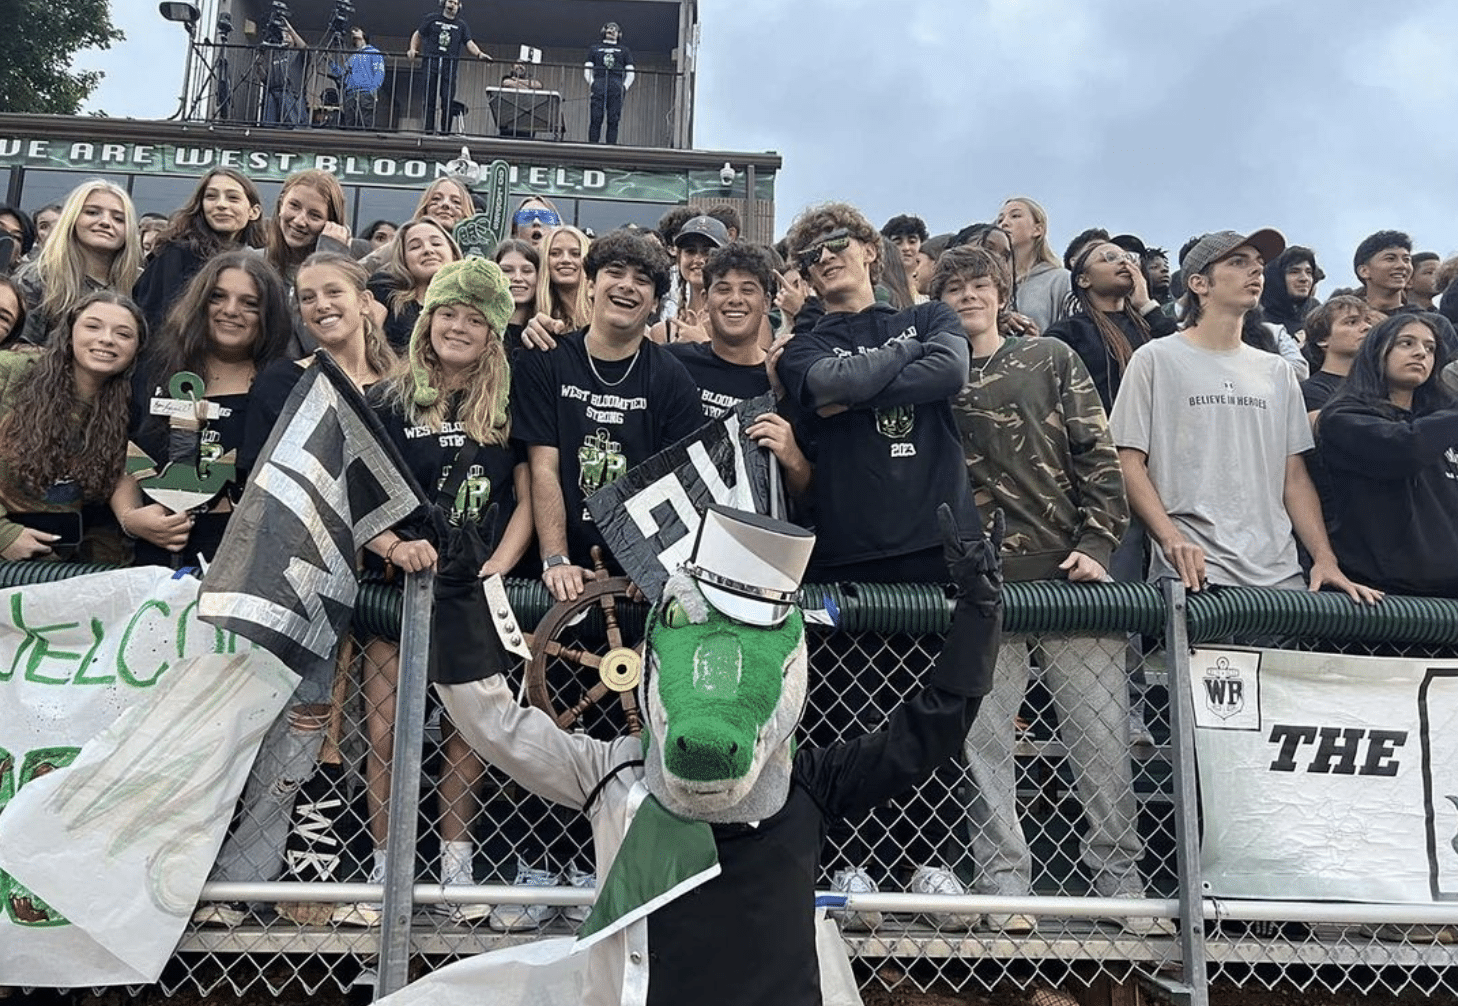 West Bloomfield High School student section smiling in the bleachers with a mascot waving their hands, creating a joyful and spirited atmosphere.